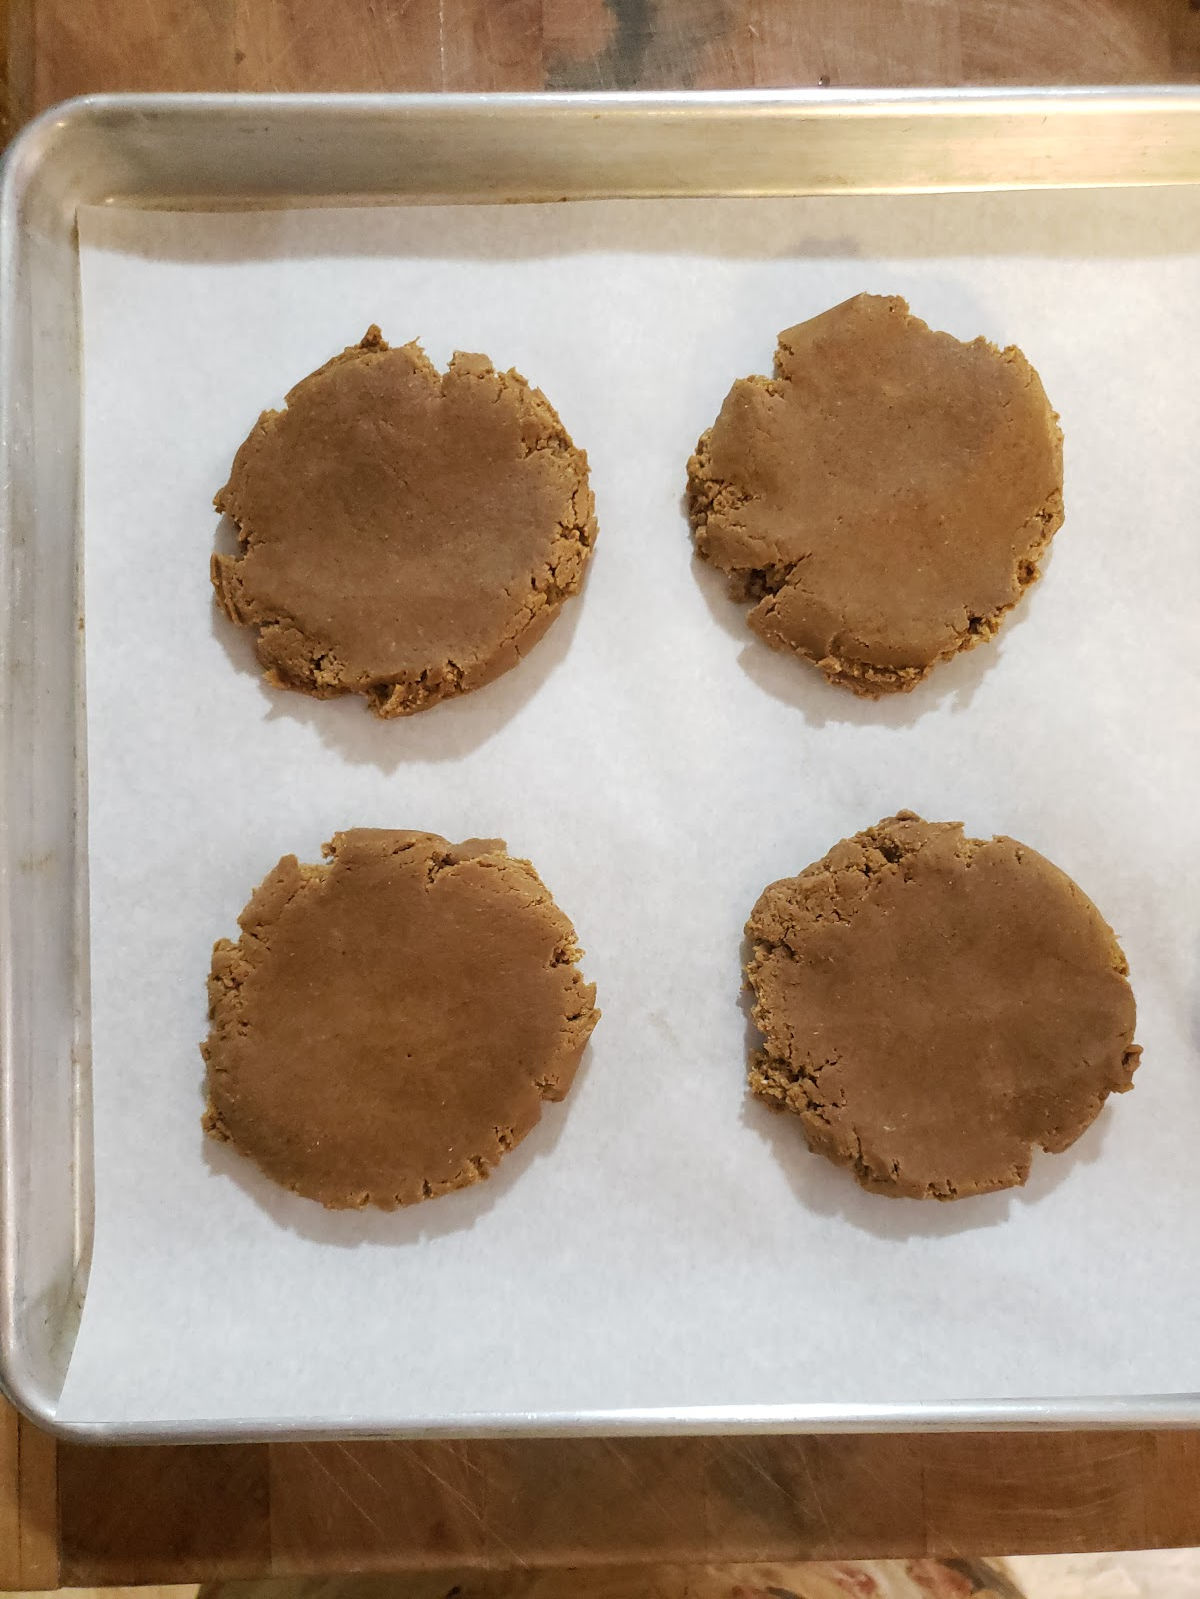 Pressed down molasses cookie dough on sheet pan with white parchment paper.